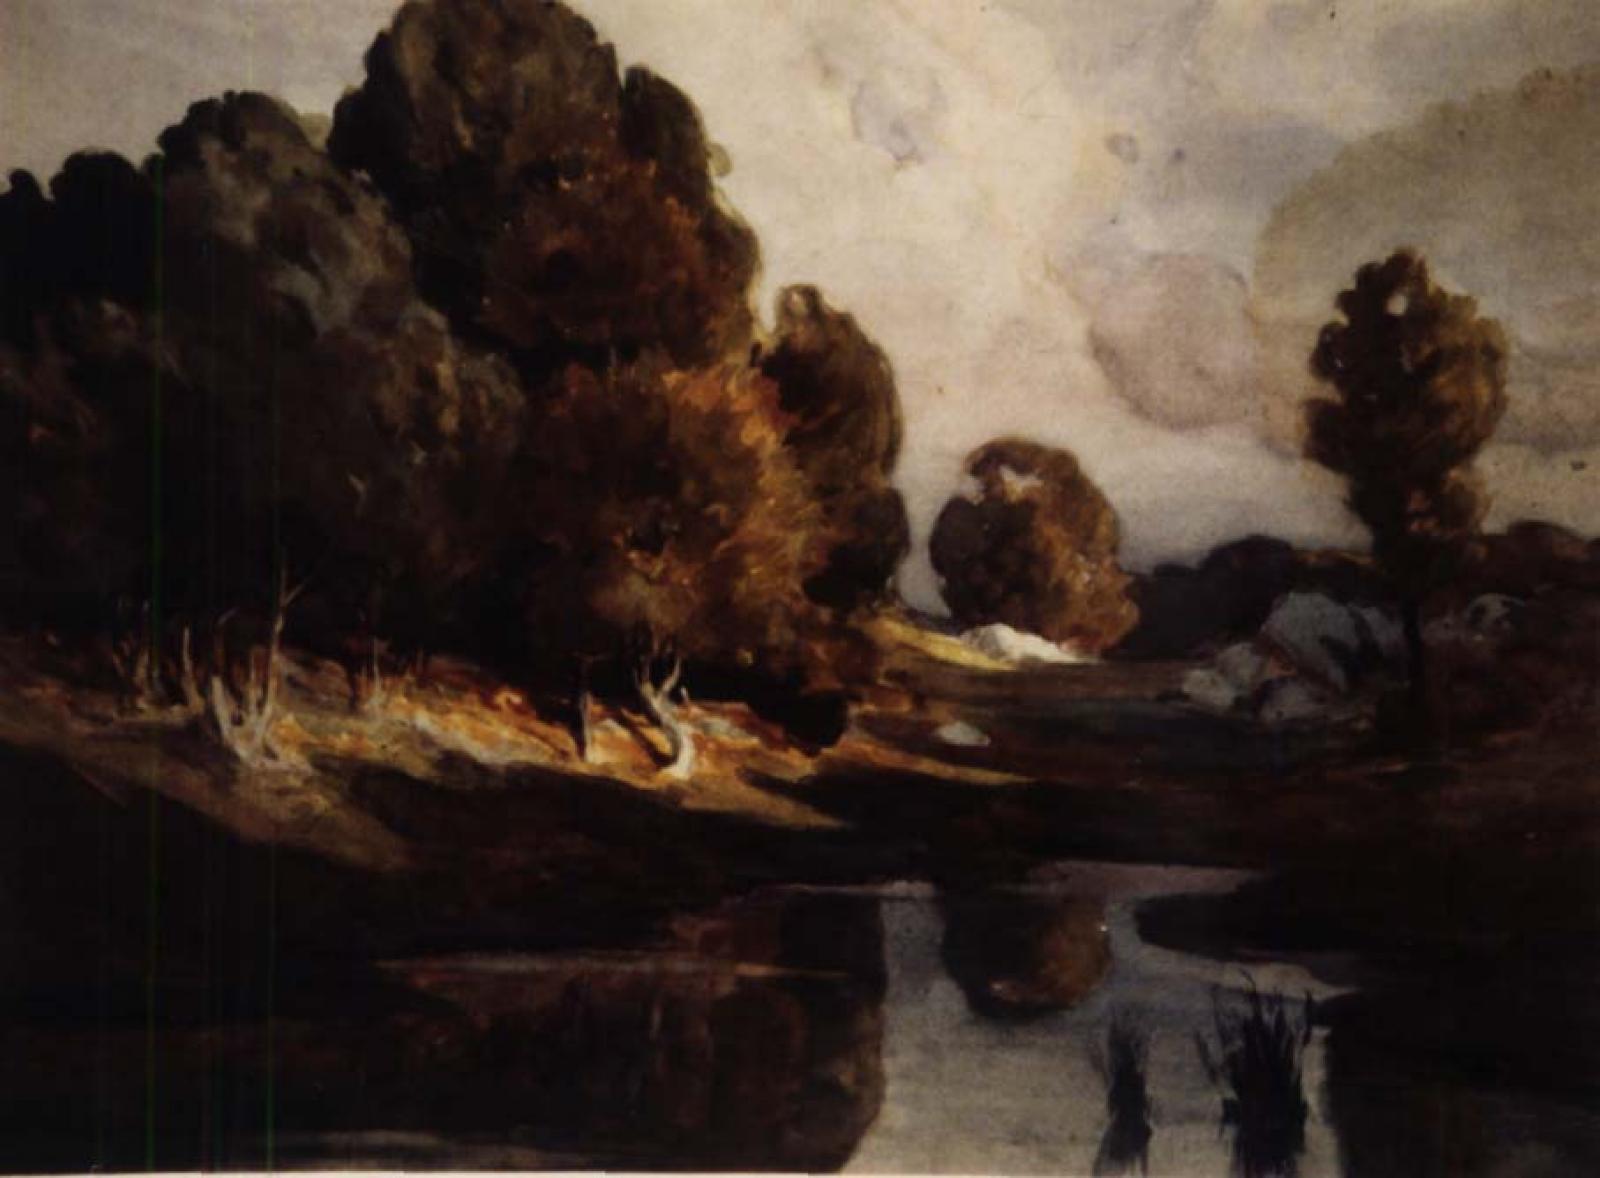 Dark pond surrounded by trees with browning leaves and a pale sky.